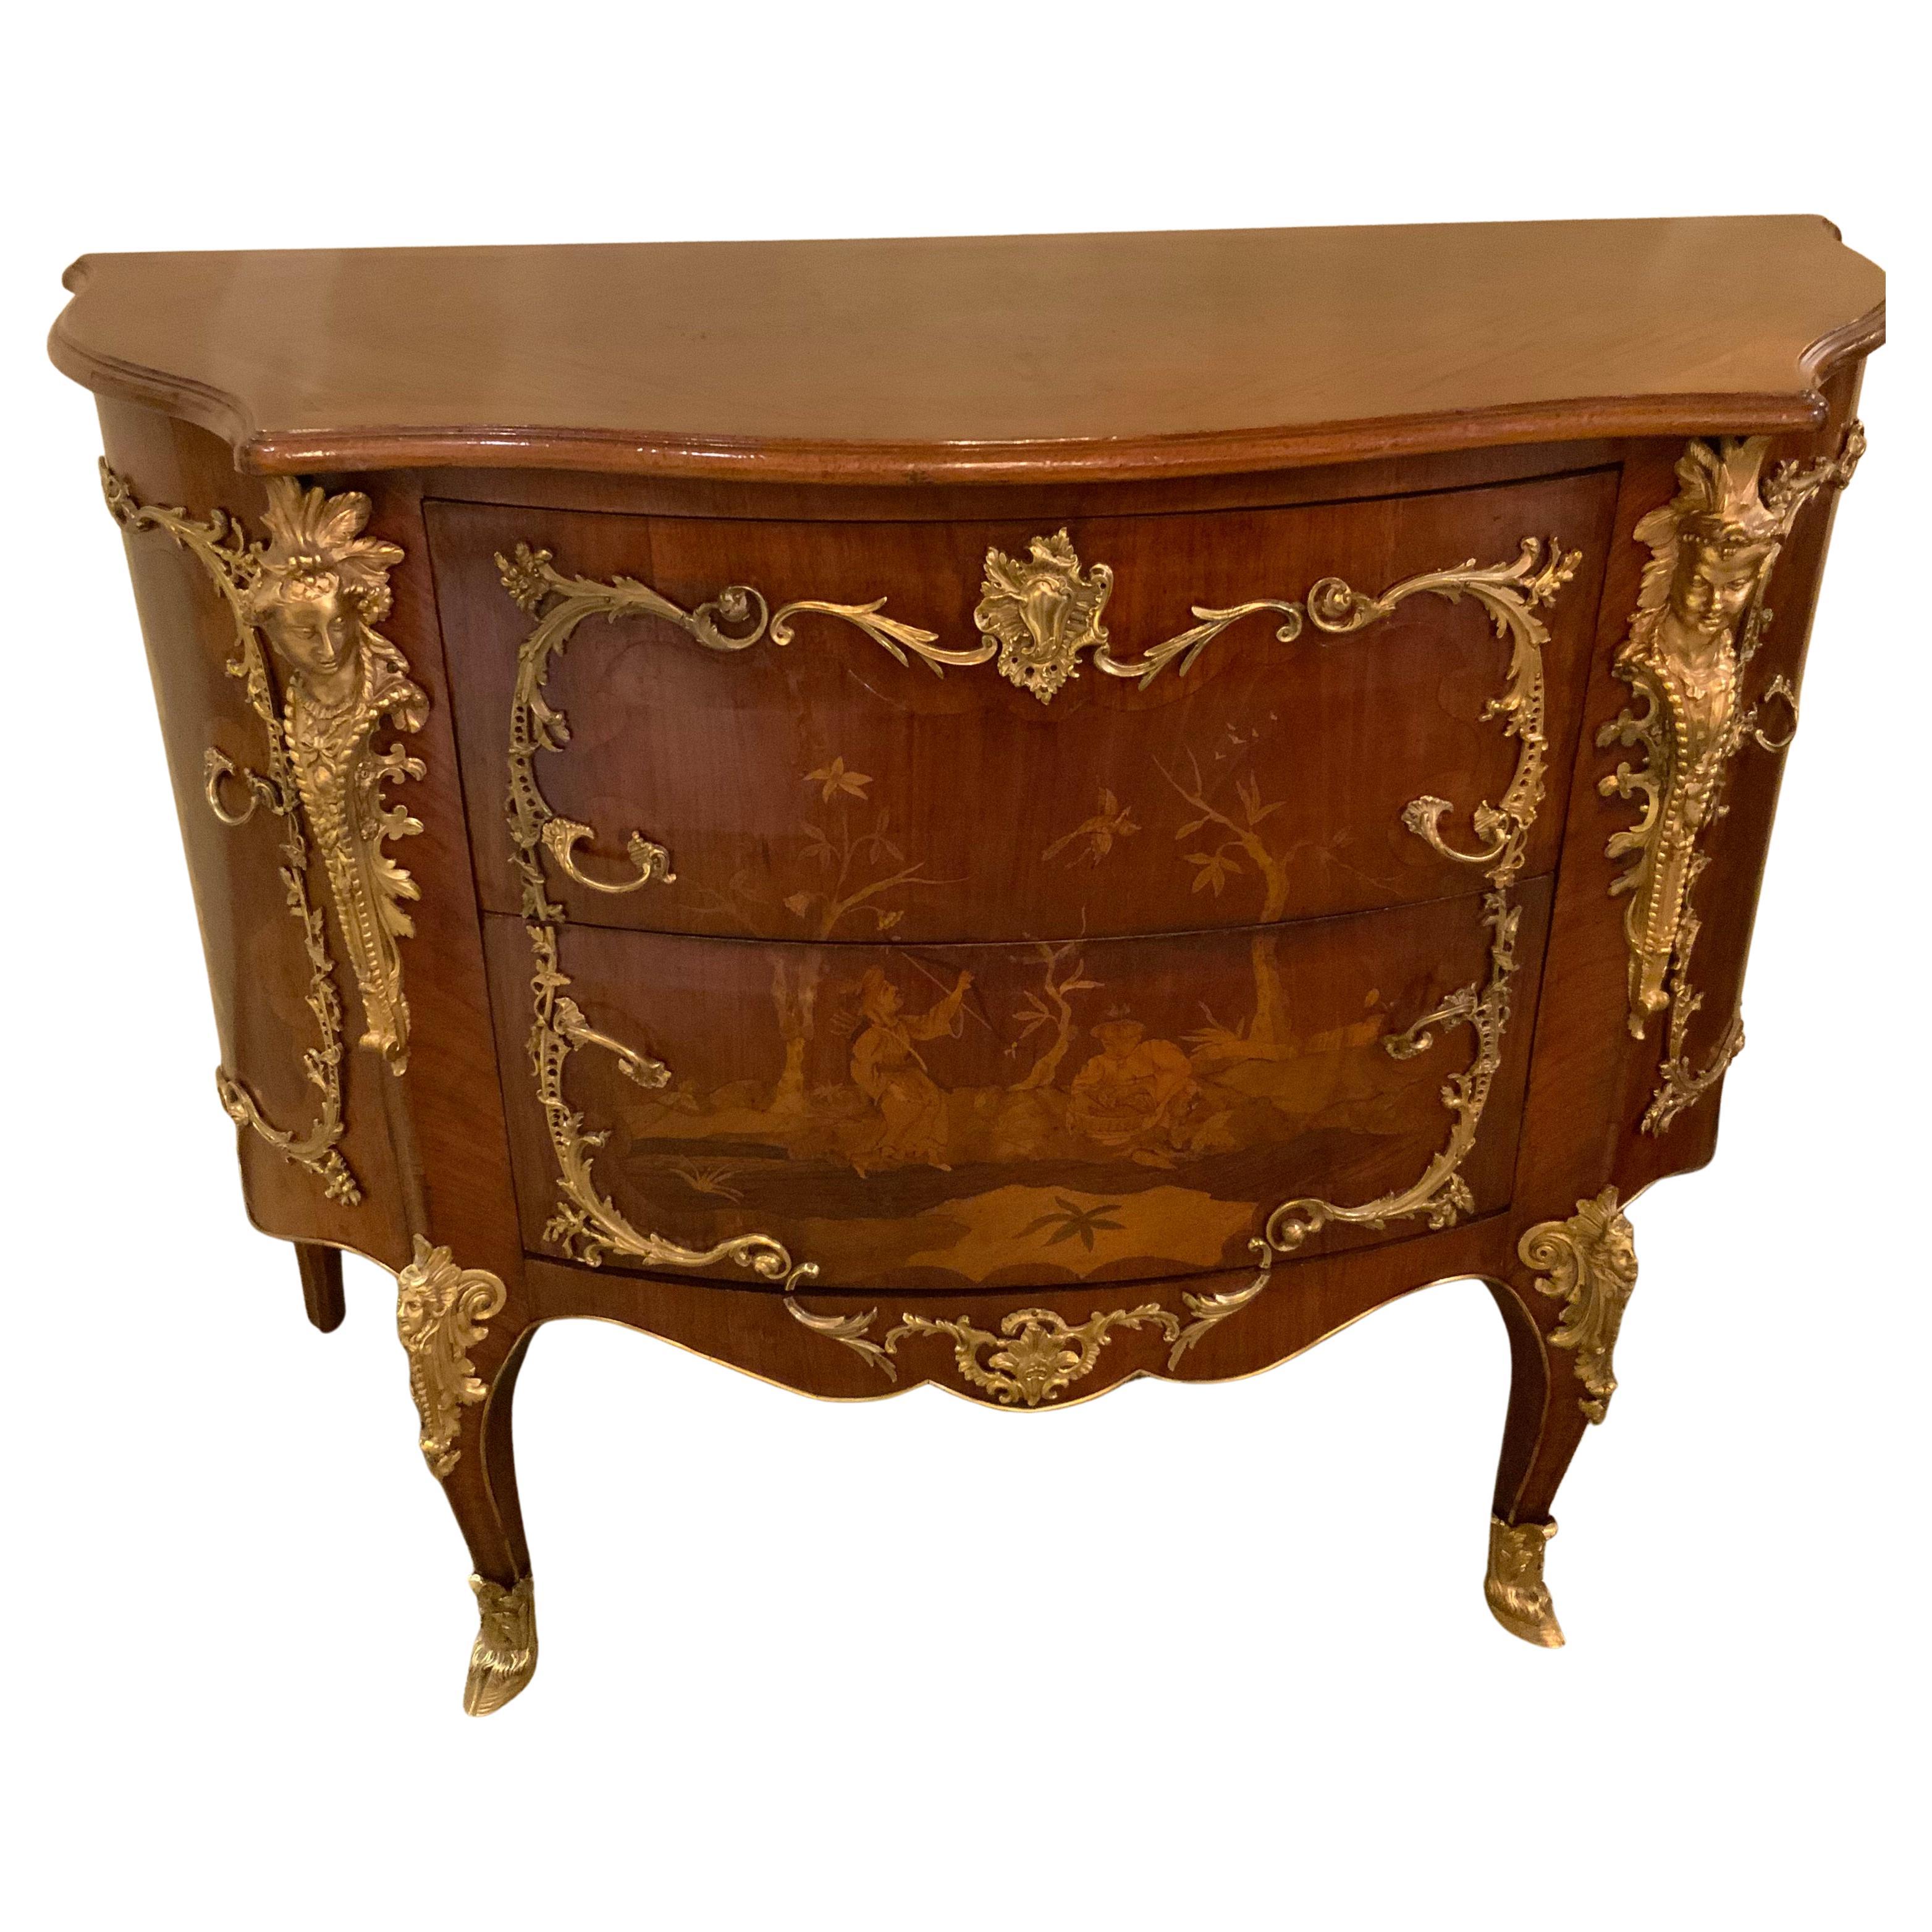 Pair of Louis XIV-Style Mahogany Inlaid Marquetry Commodes, 19th Century For Sale